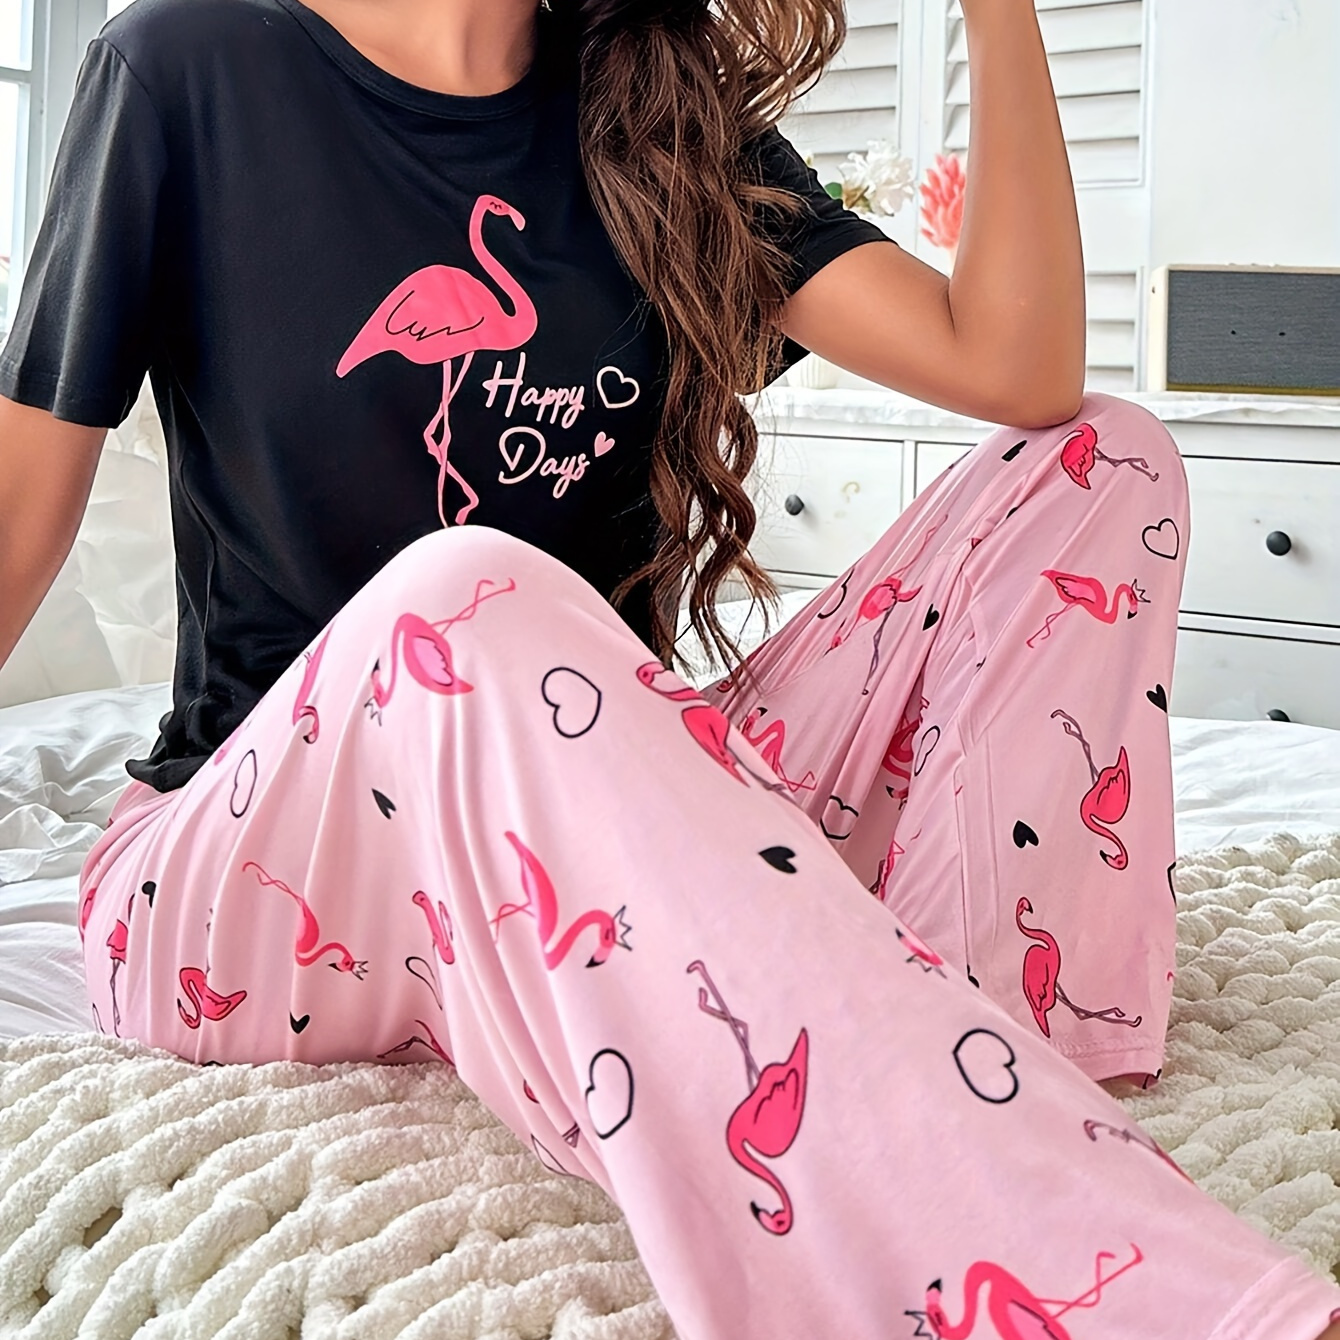 

Women's Flamingo & Slogan Print Casual Pajama Set, Short Sleeve Round Neck Top & Pants, Comfortable Relaxed Fit